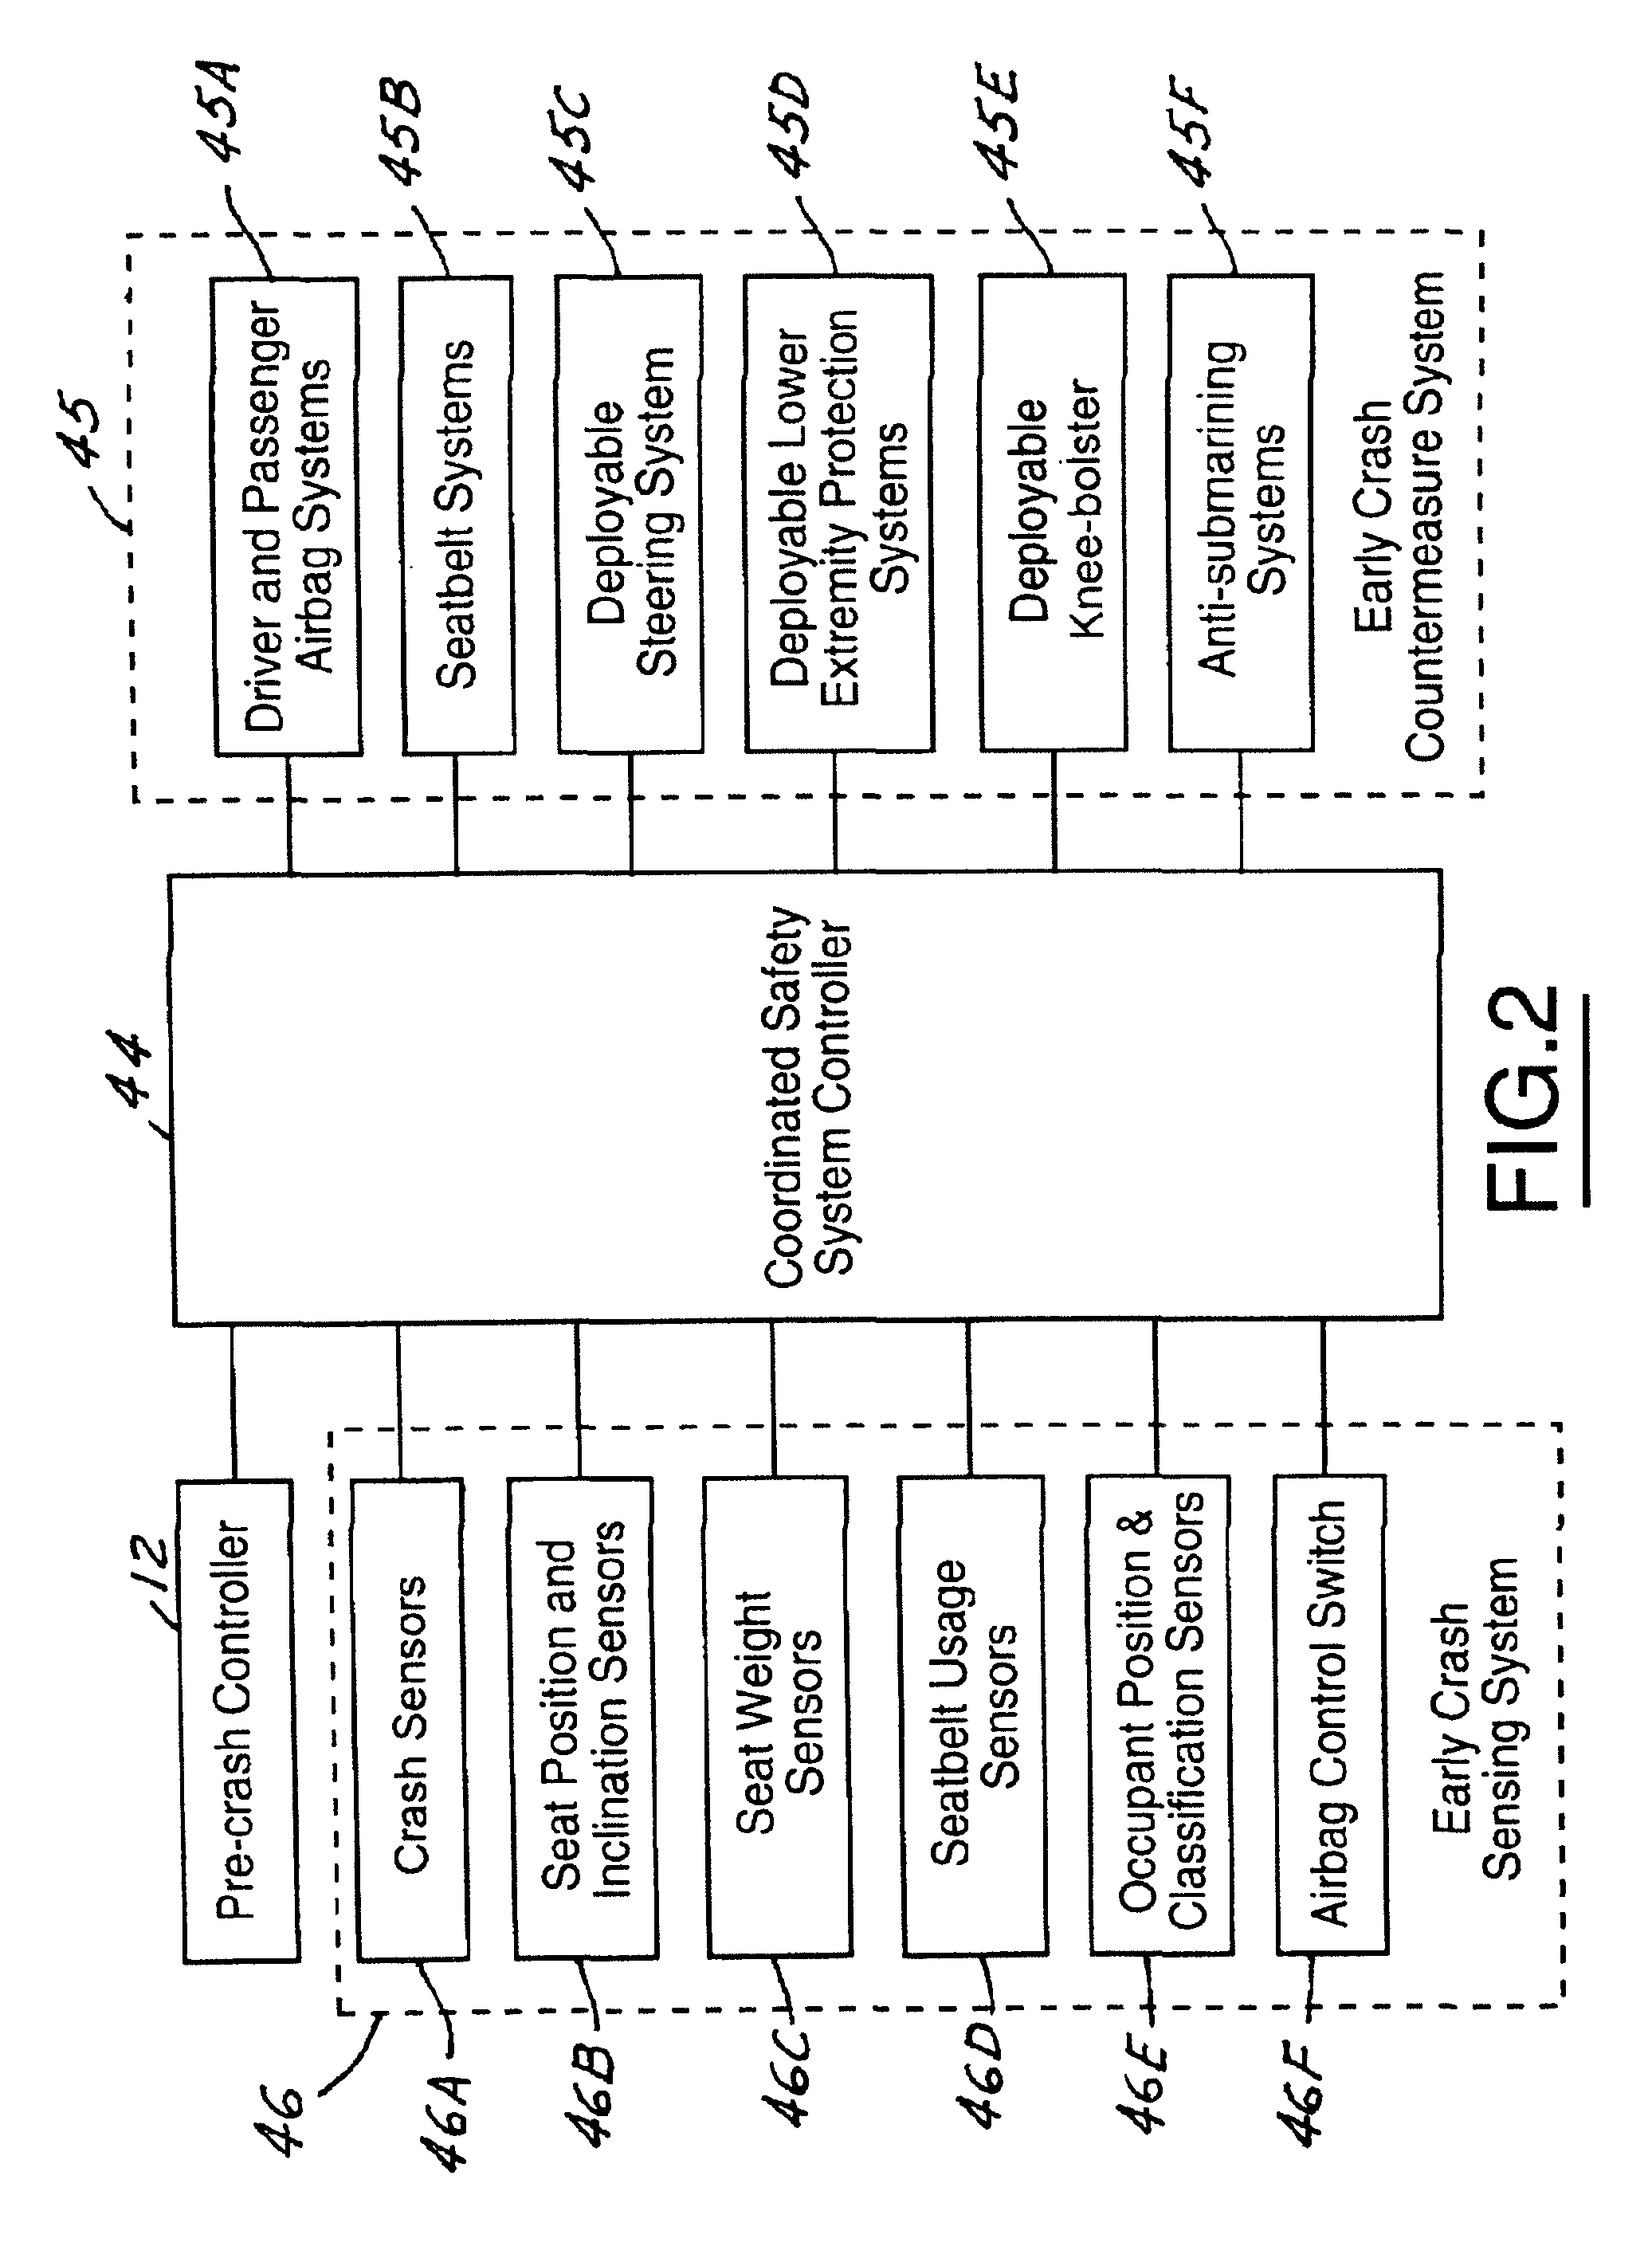 Method for operating a vehicle crash safety system in a vehicle having a pre-crash sensing system and countermeasure systems